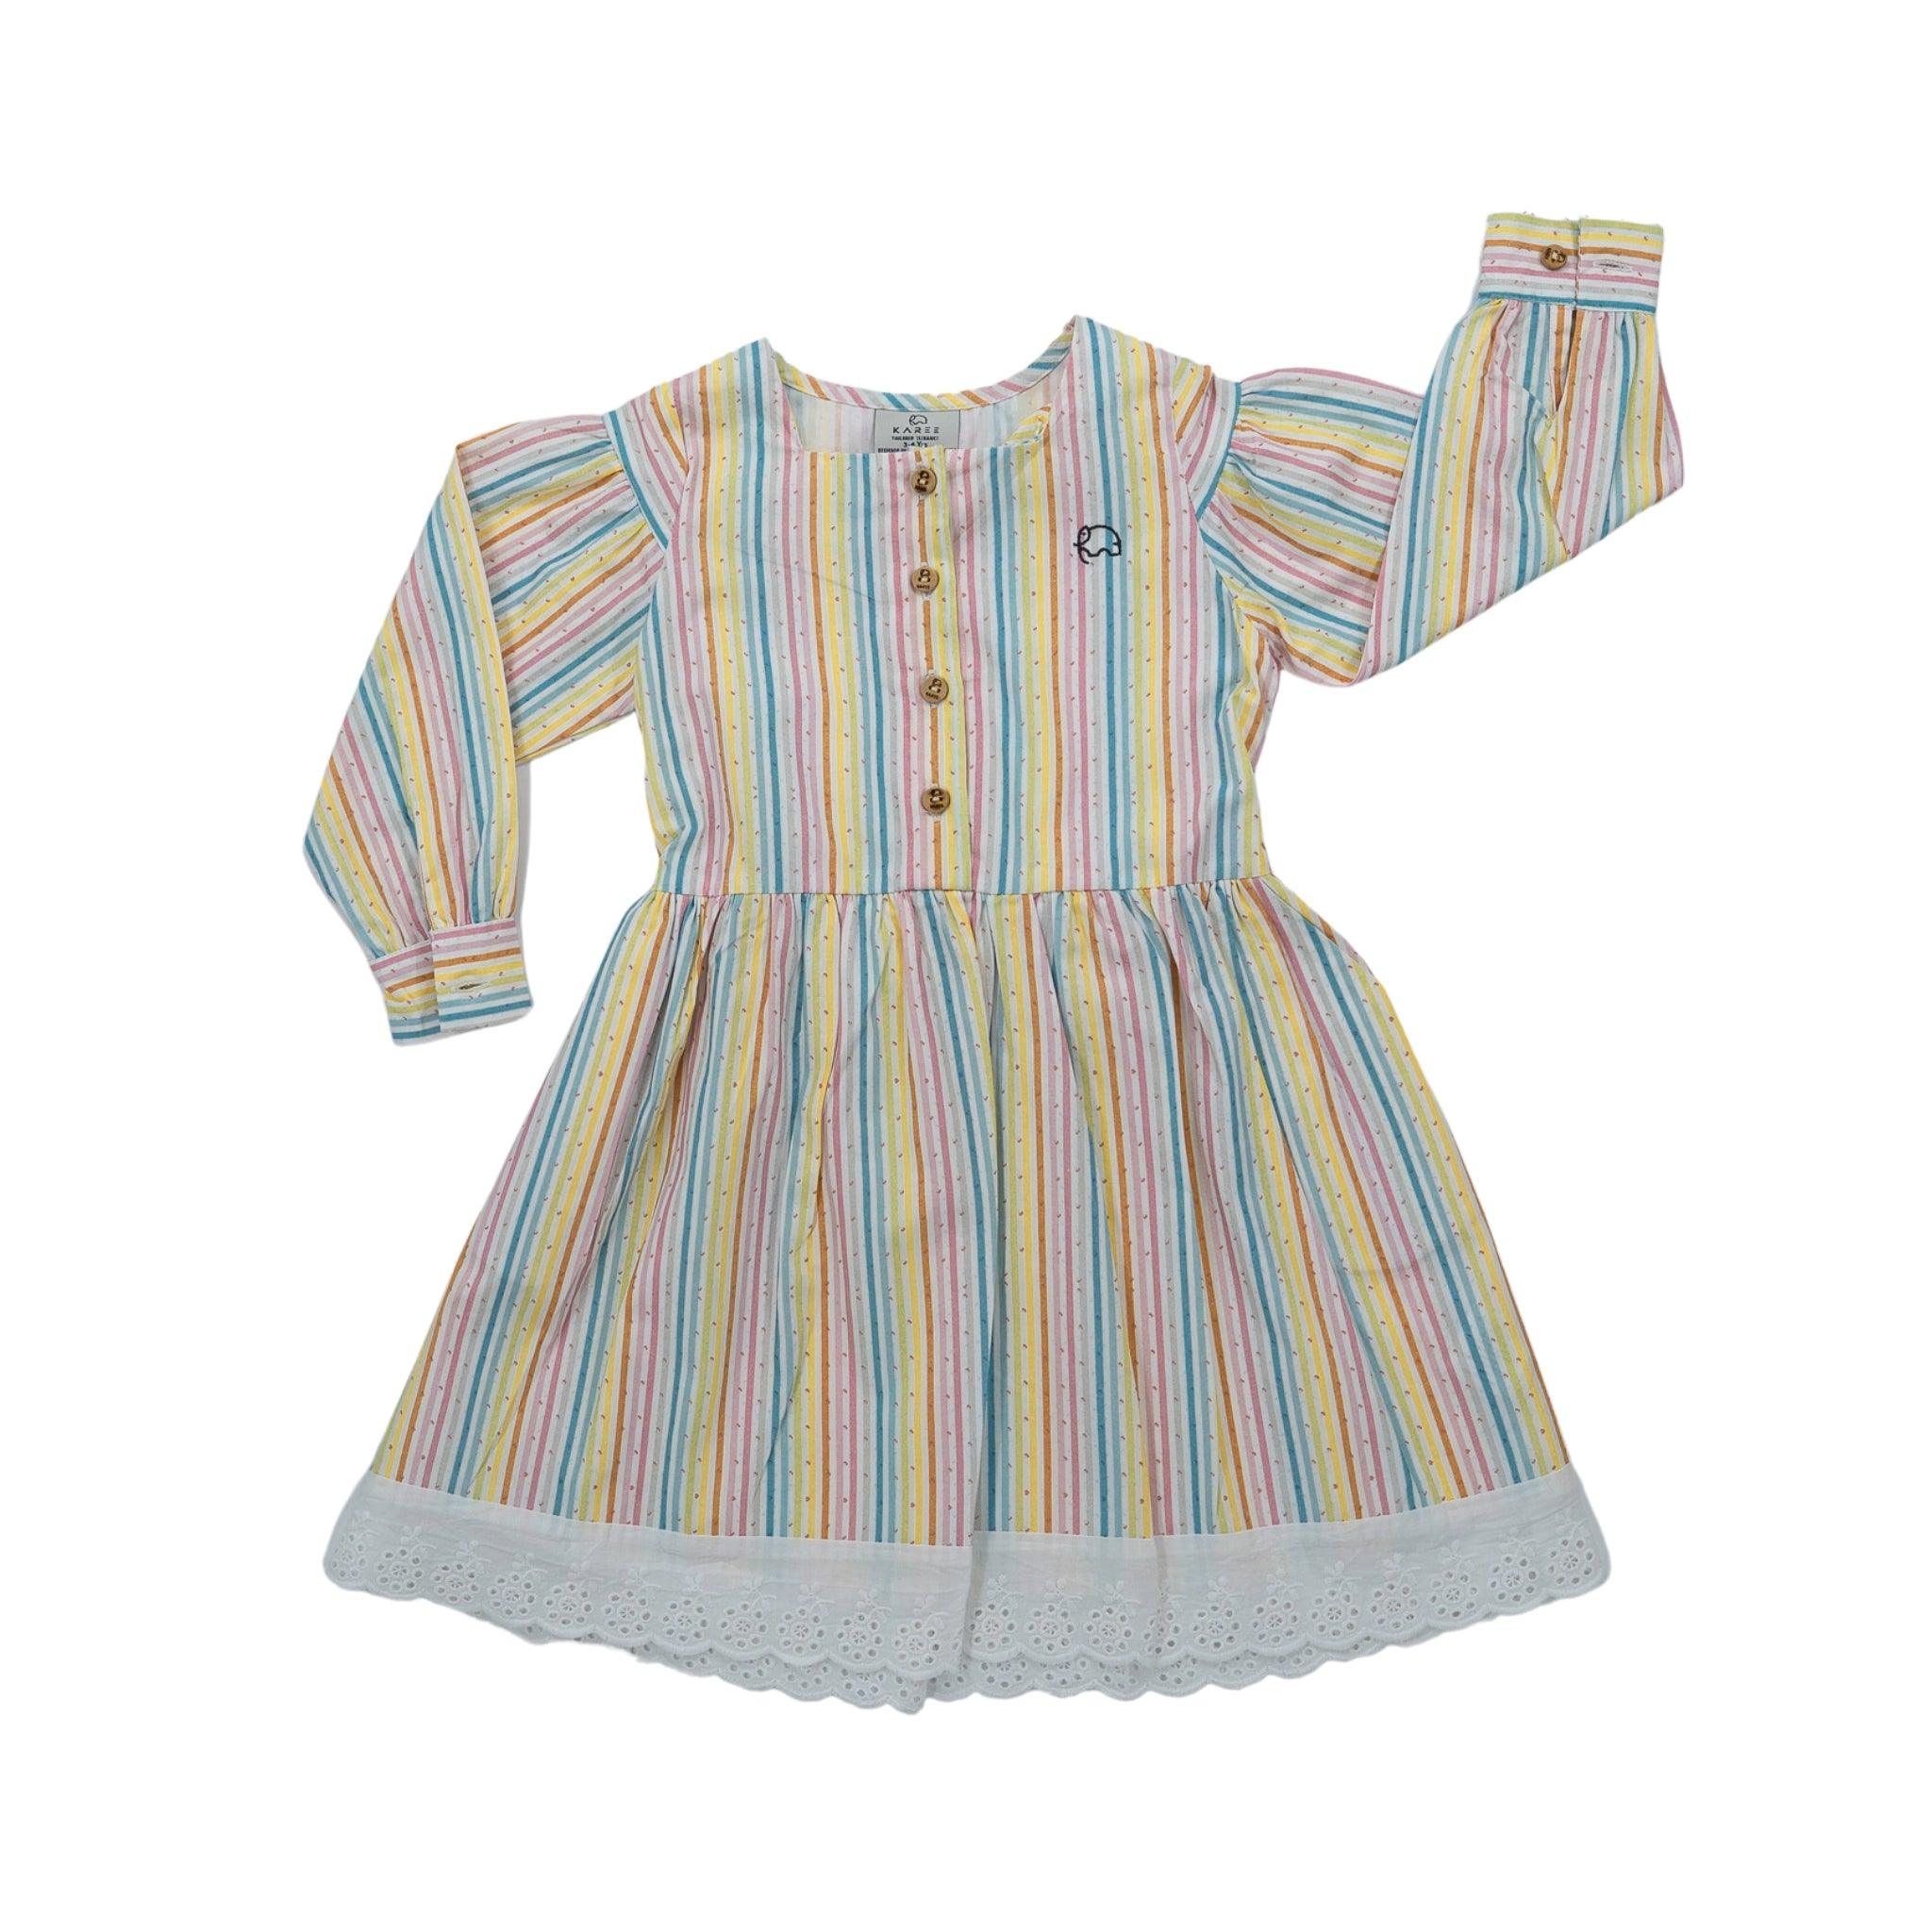 A multicolored striped children's dress with long puff sleeves, buttons down the front, and white lace trim at the hem by Karee.